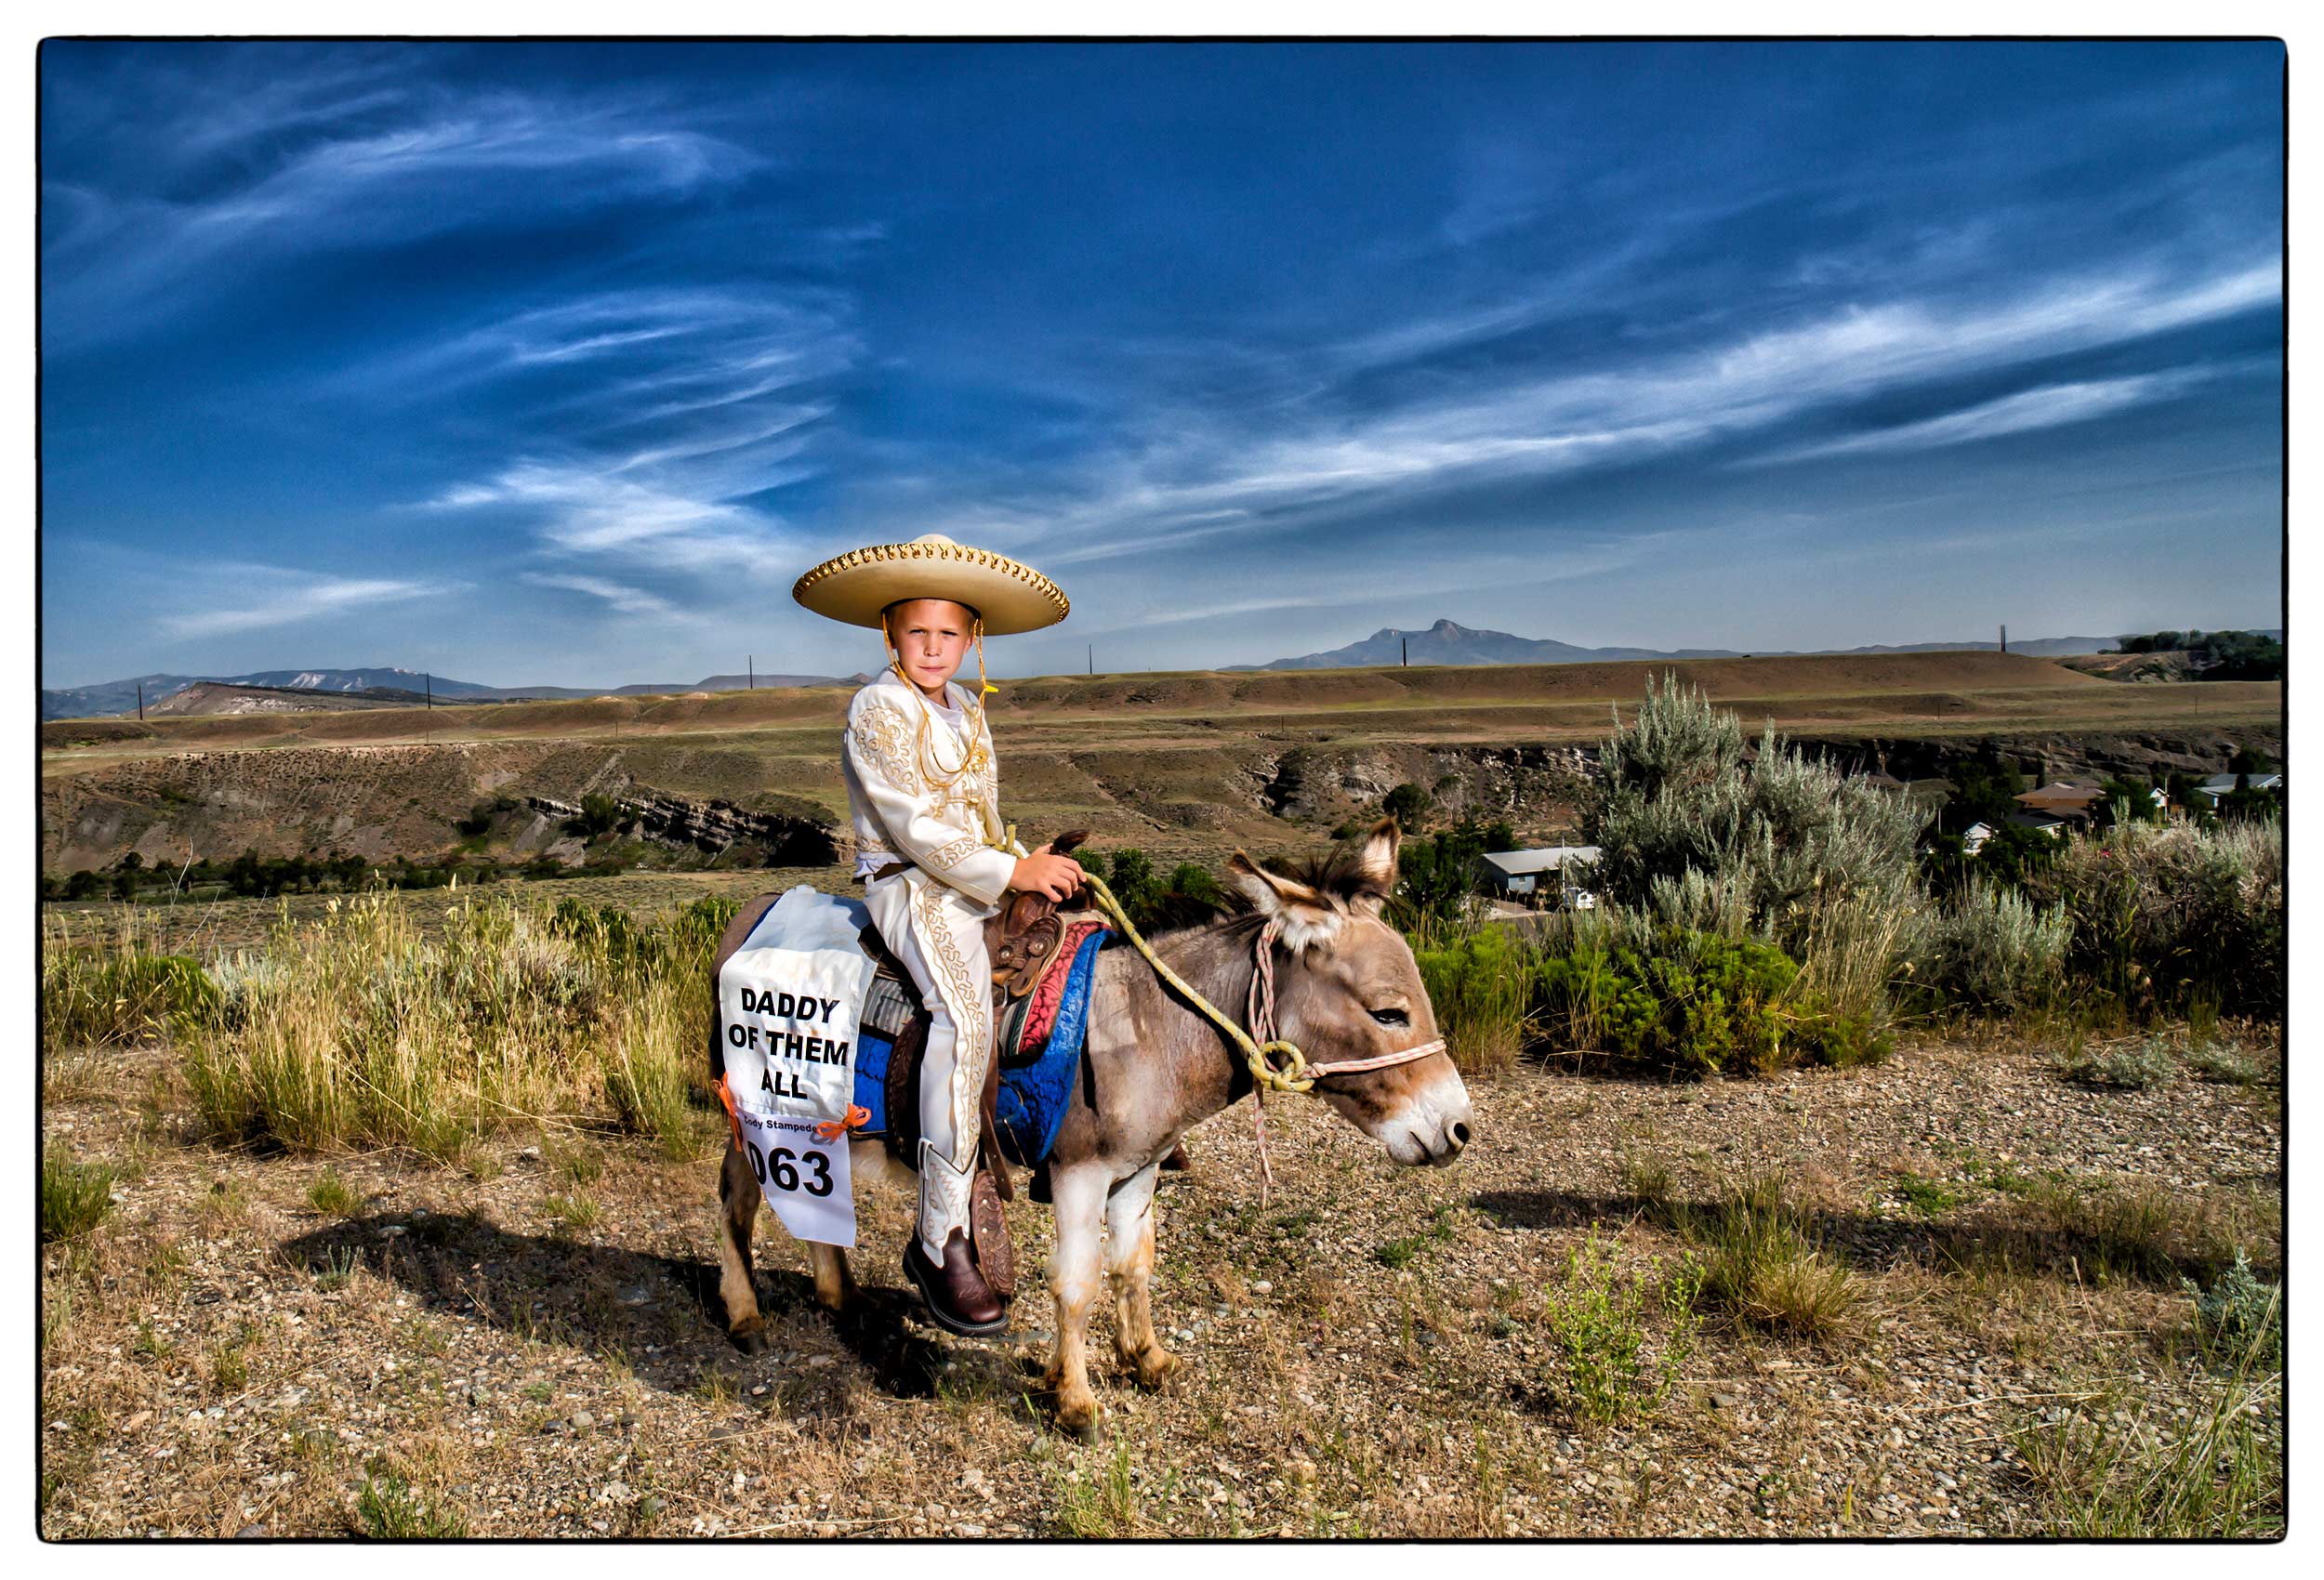 a-young-boy-dressed-in-mexican-attire-sits-on-a-donkey-during-rodeo-weekend-in-cody-wyoming